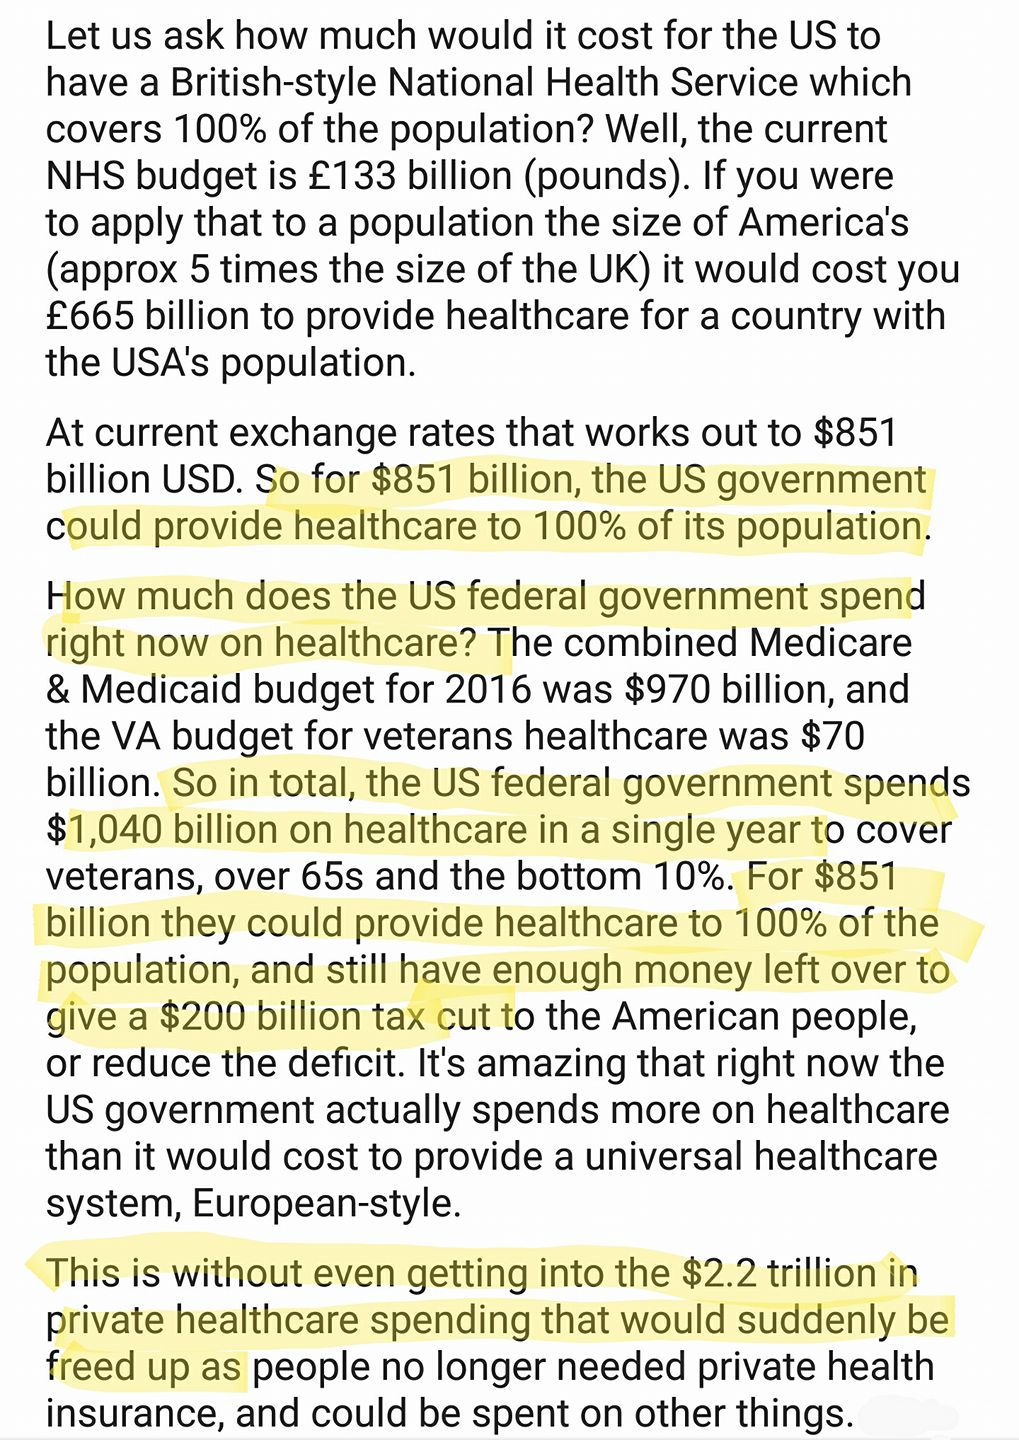 Let us ask how much would it cost for the US to
have a British-style National Health Service which
covers 100% of the population? Well, the current
NHS budget is £133 billion (pounds). If you were

to apply that to a population the size of America's
(approx 5 times the size of the UK) it would cost you
£665 billion to provide healthcare for a country with
the USA's population.

At current exchange rates that works out to $851
billion USD. So for $851 billion, the US government
could provide healthcare to 100% of its population.

How much does the US federal government spend
right now on healthcare? The combined Medicare

& Medicaid budget for 2016 was $970 billion, and
the VA budget for veterans healthcare was $70
billion. So in total, the US federal government spends
$1,040 billion on healthcare in a single year to cover
veterans, over 65s and the bottom 10%. For $851
billion they could provide healthcare to 100% of the
population, and still have enough money left over to
give a $200 billion tax cut to the American people,
or reduce the deficit. It's amazing that right now the
US government actually spends more on healthcare
than it would cost to provide a universal healthcare
system, European-style.

This is without even getting into the $2.2 trillion in
private healthcare spending that would suddenly be
freed up as people no longer needed private health
insurance, and could be spent on other things.